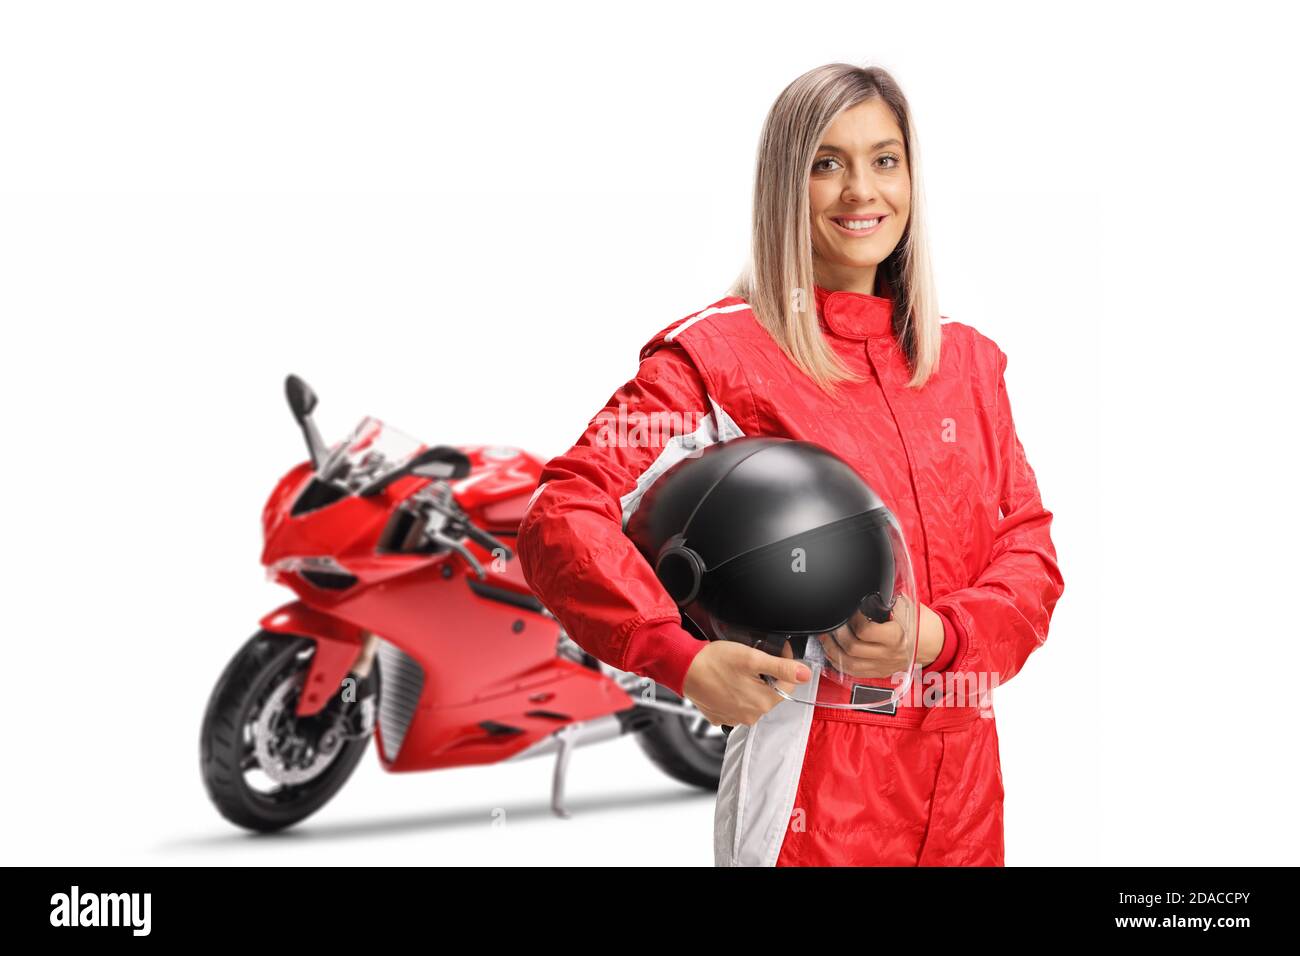 Smiling female motorbike racer in a red suit holding a helmet isolated on white background Stock Photo